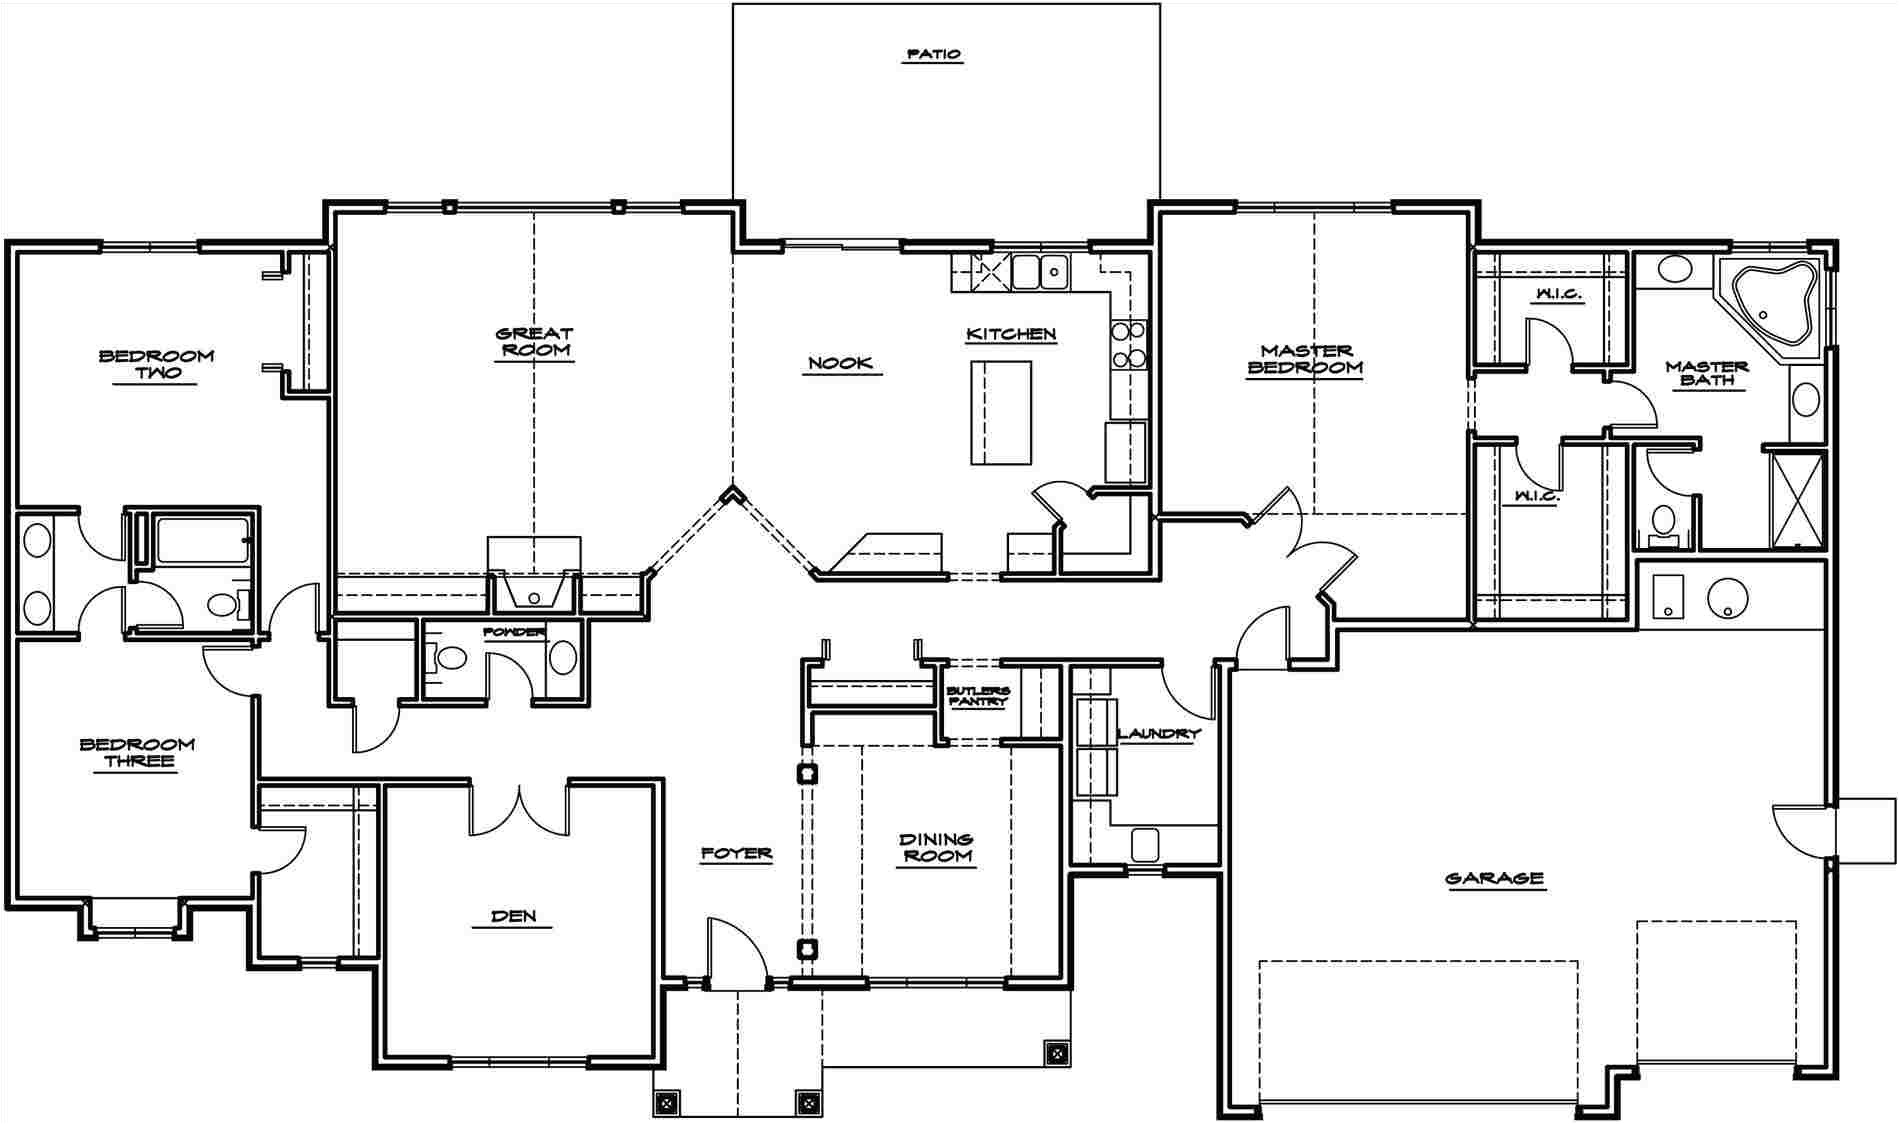 scintillating south florida rhcleancrewca with house plans ogden utah scintillating south florida rhcleancrewca uncategorized custom home plan photos rare for best jpg